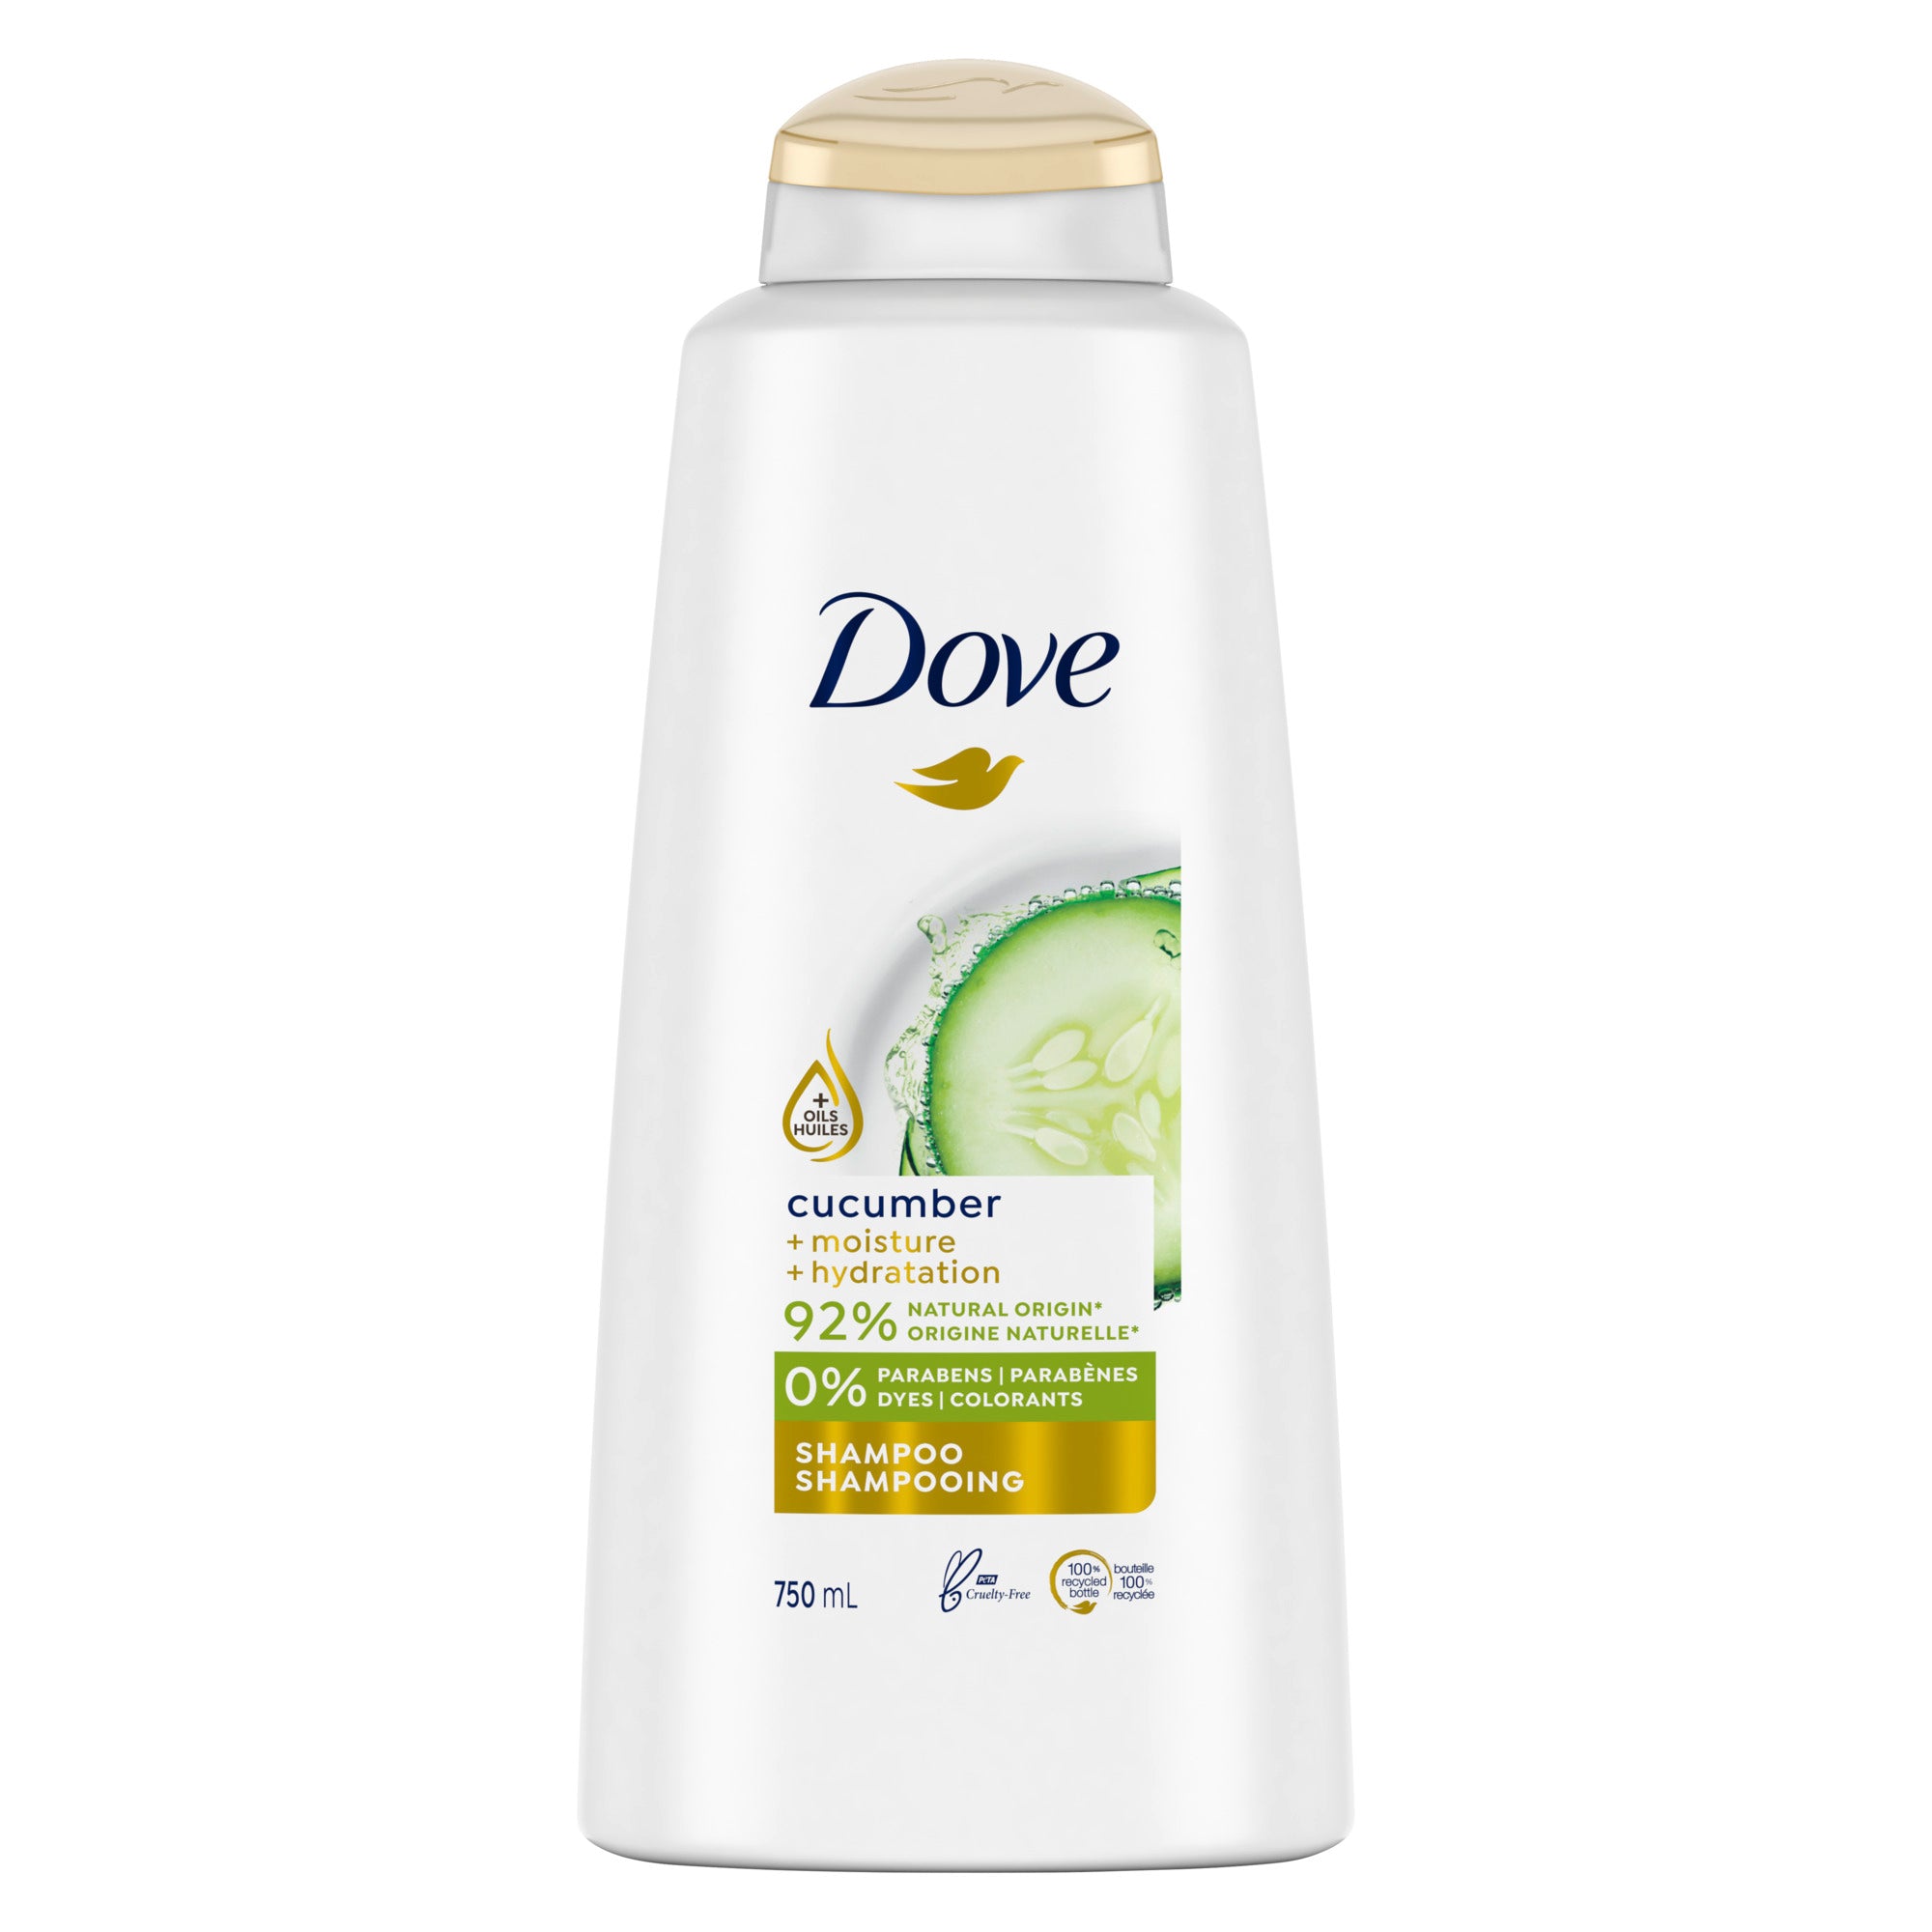 Showing the front angle view of the Dove Cool Moisture (Cucumber + Moisture) Shampoo 750mL product.